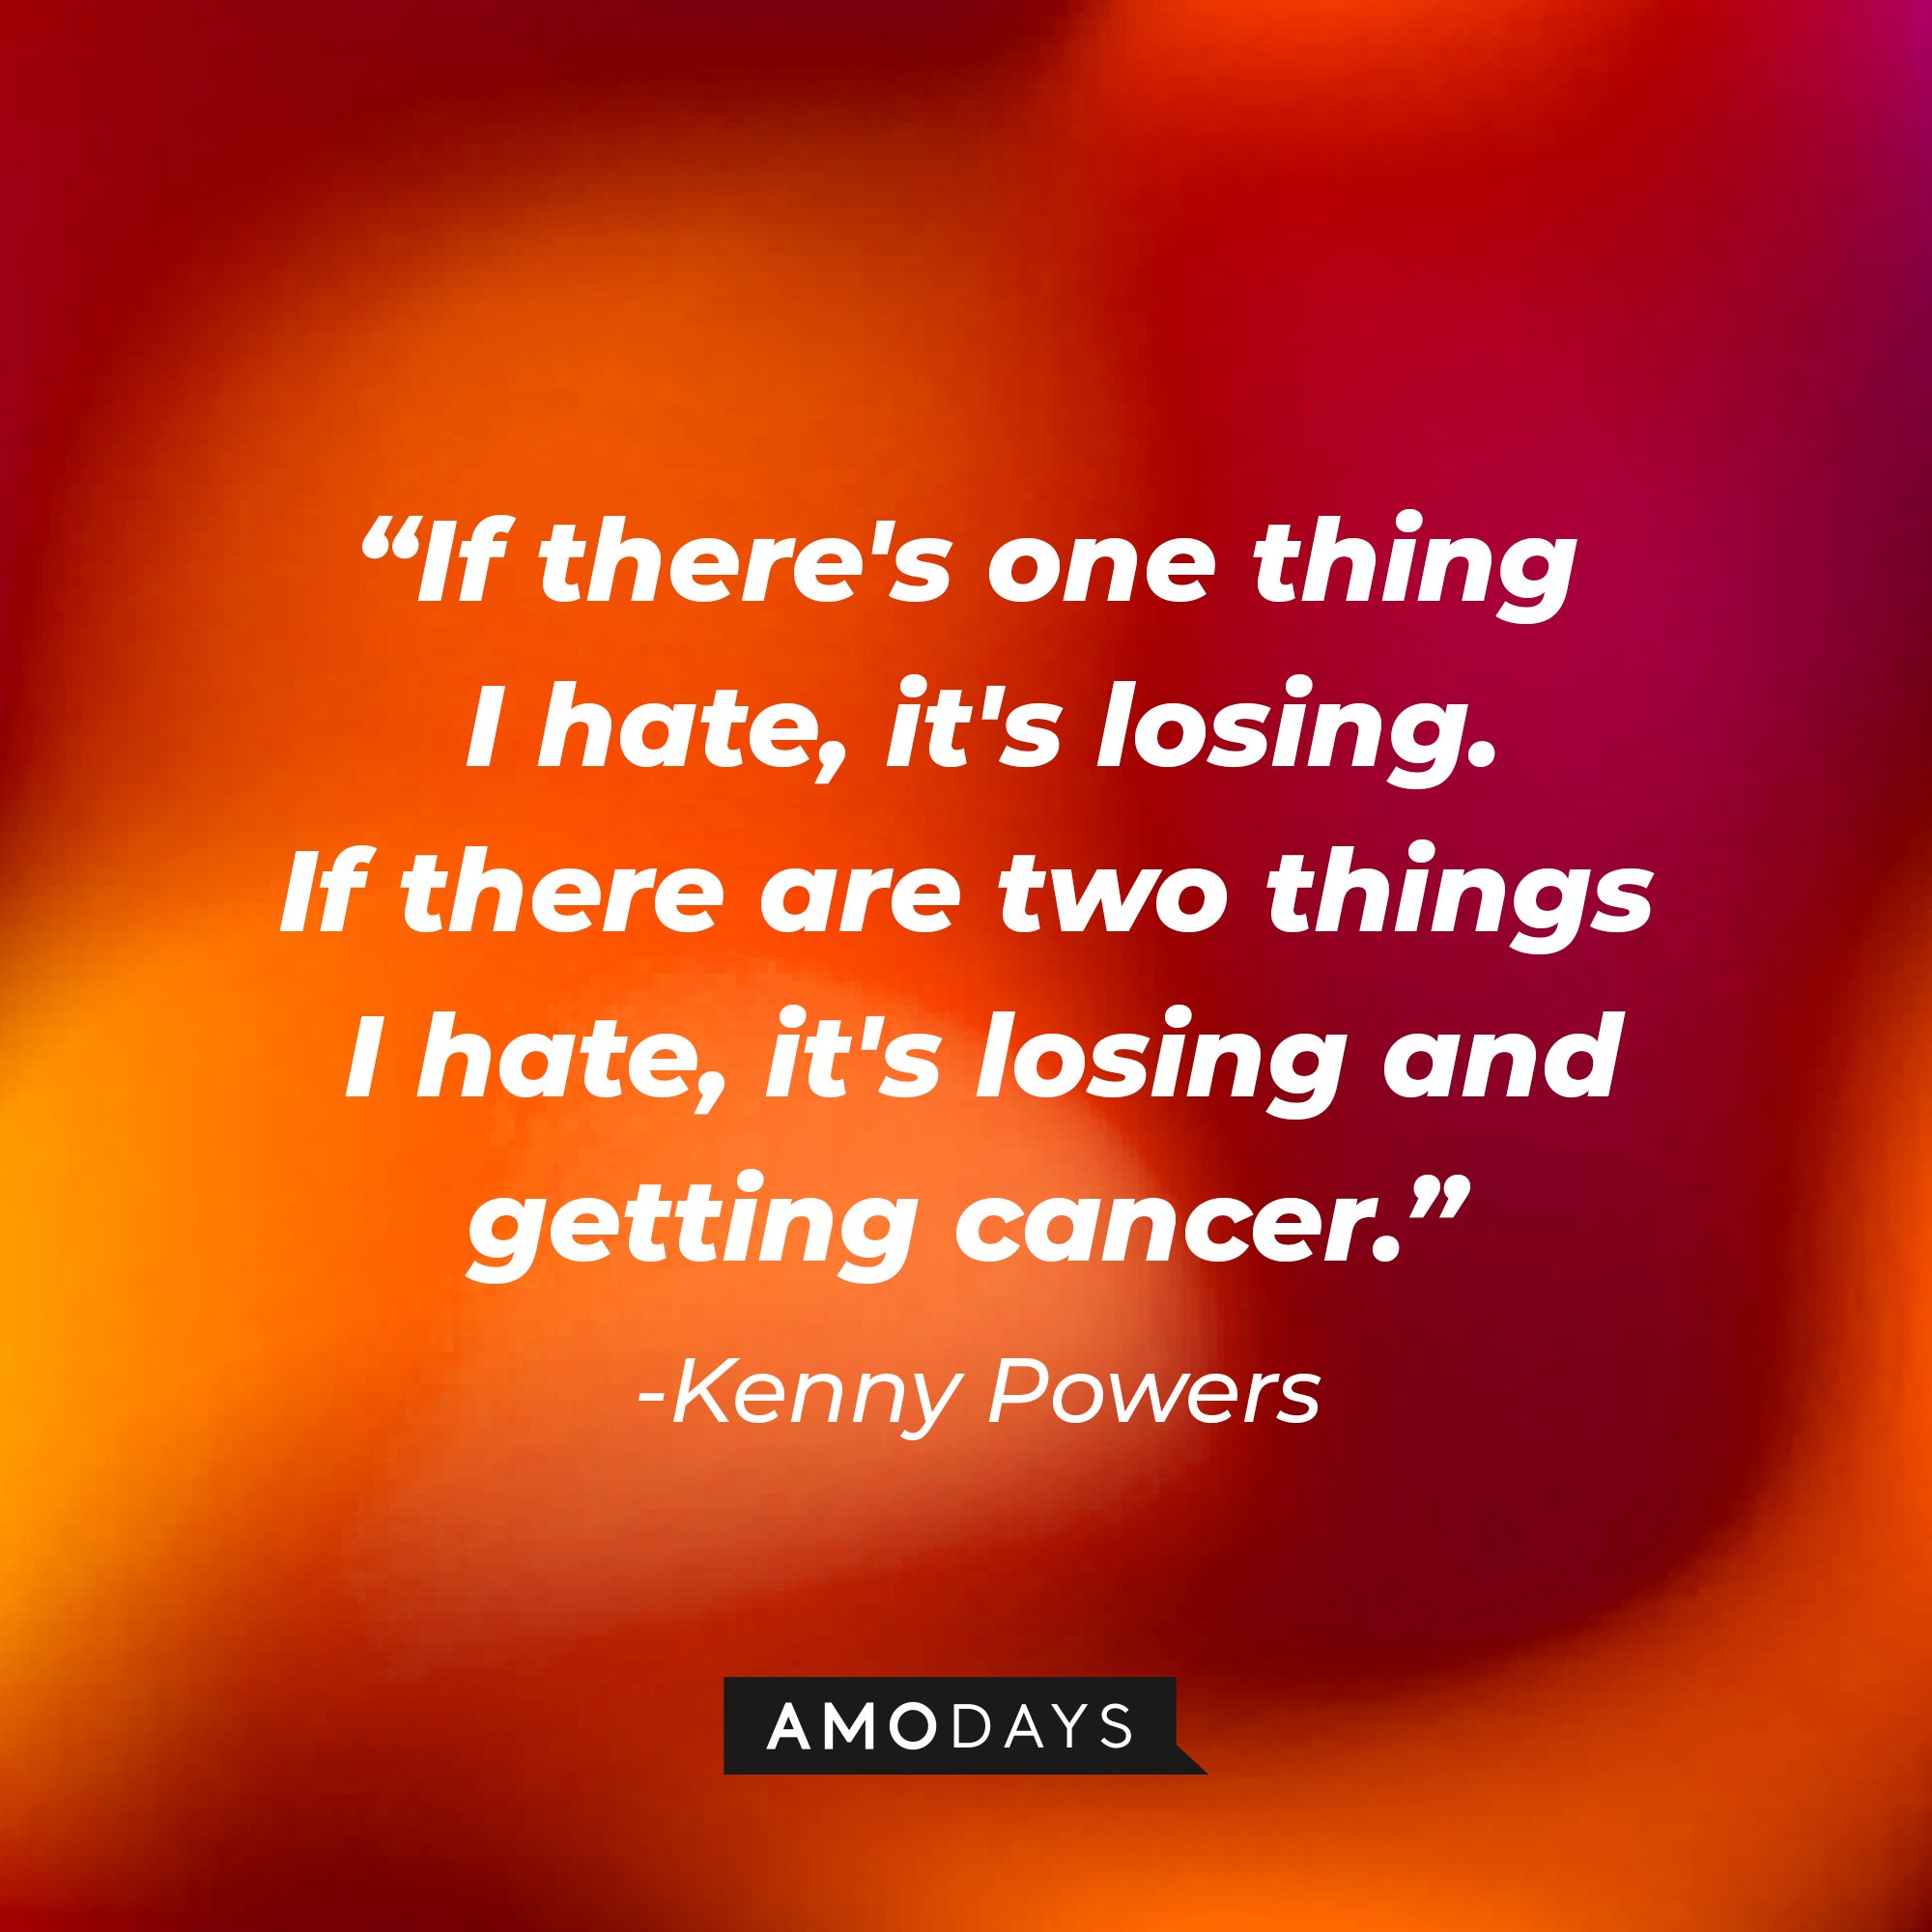 Kenny Powers' quote: “If there's one thing I hate, it's losing. If there are two things I hate, it's losing and getting cancer.”  | Image: AmoDays